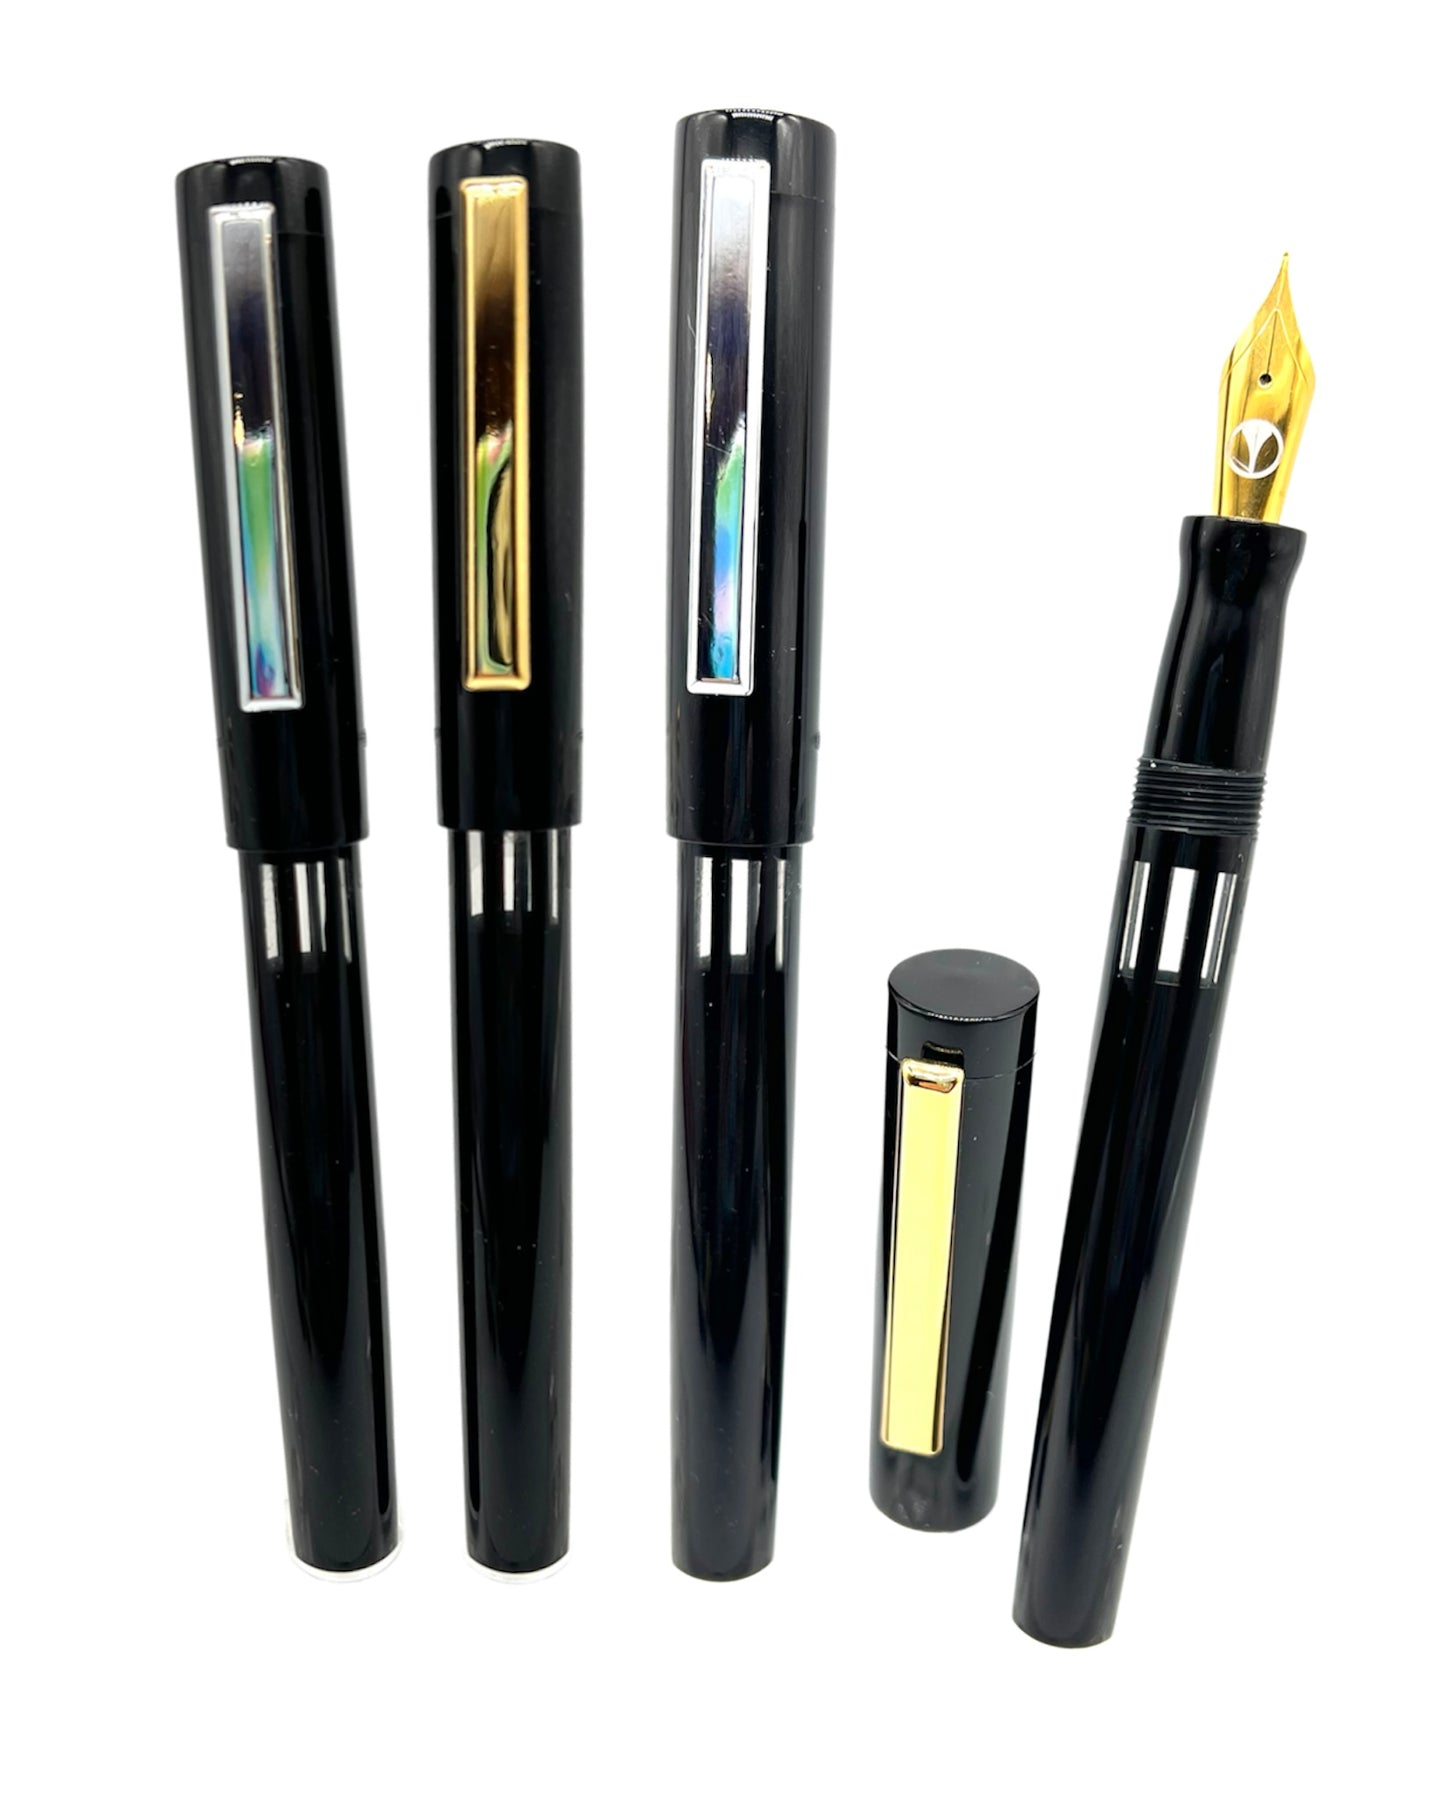 Black Classic "Looking Glass" Fountain Pen